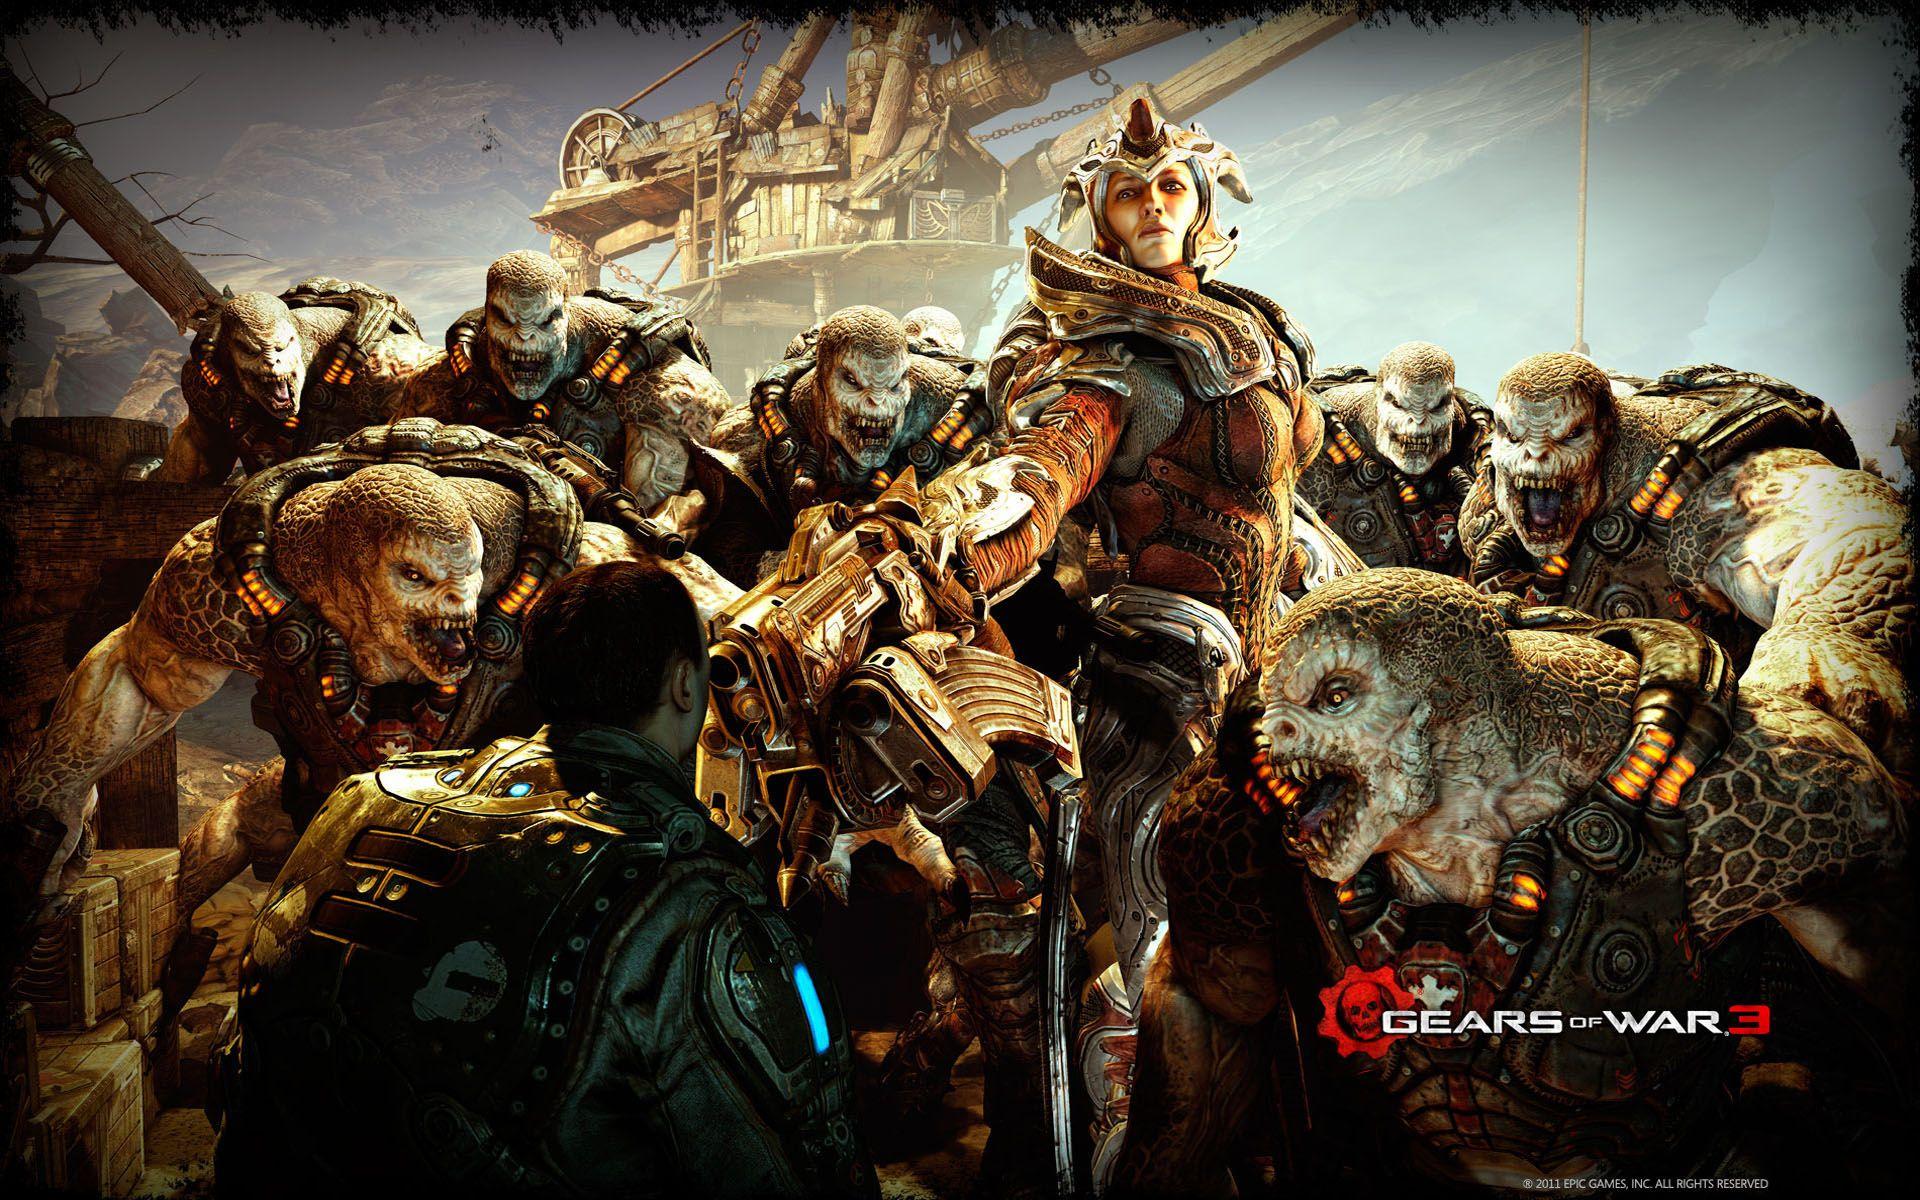 Gears Of War 3 Video Games HD Wallpapers ~ Xbox 360 Games Wallpapers